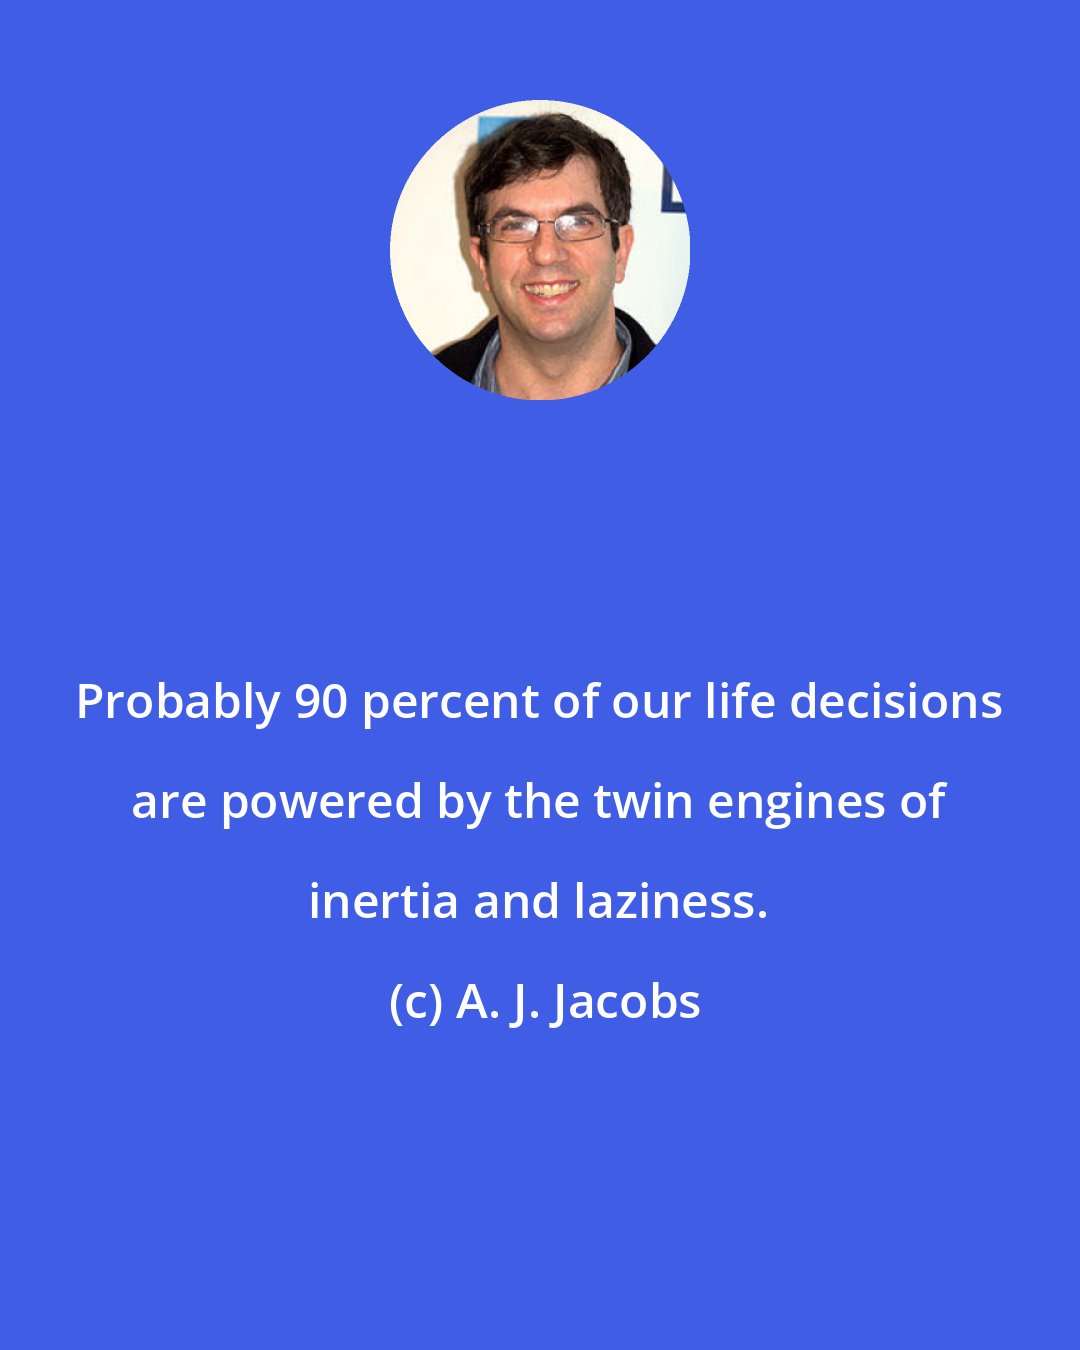 A. J. Jacobs: Probably 90 percent of our life decisions are powered by the twin engines of inertia and laziness.